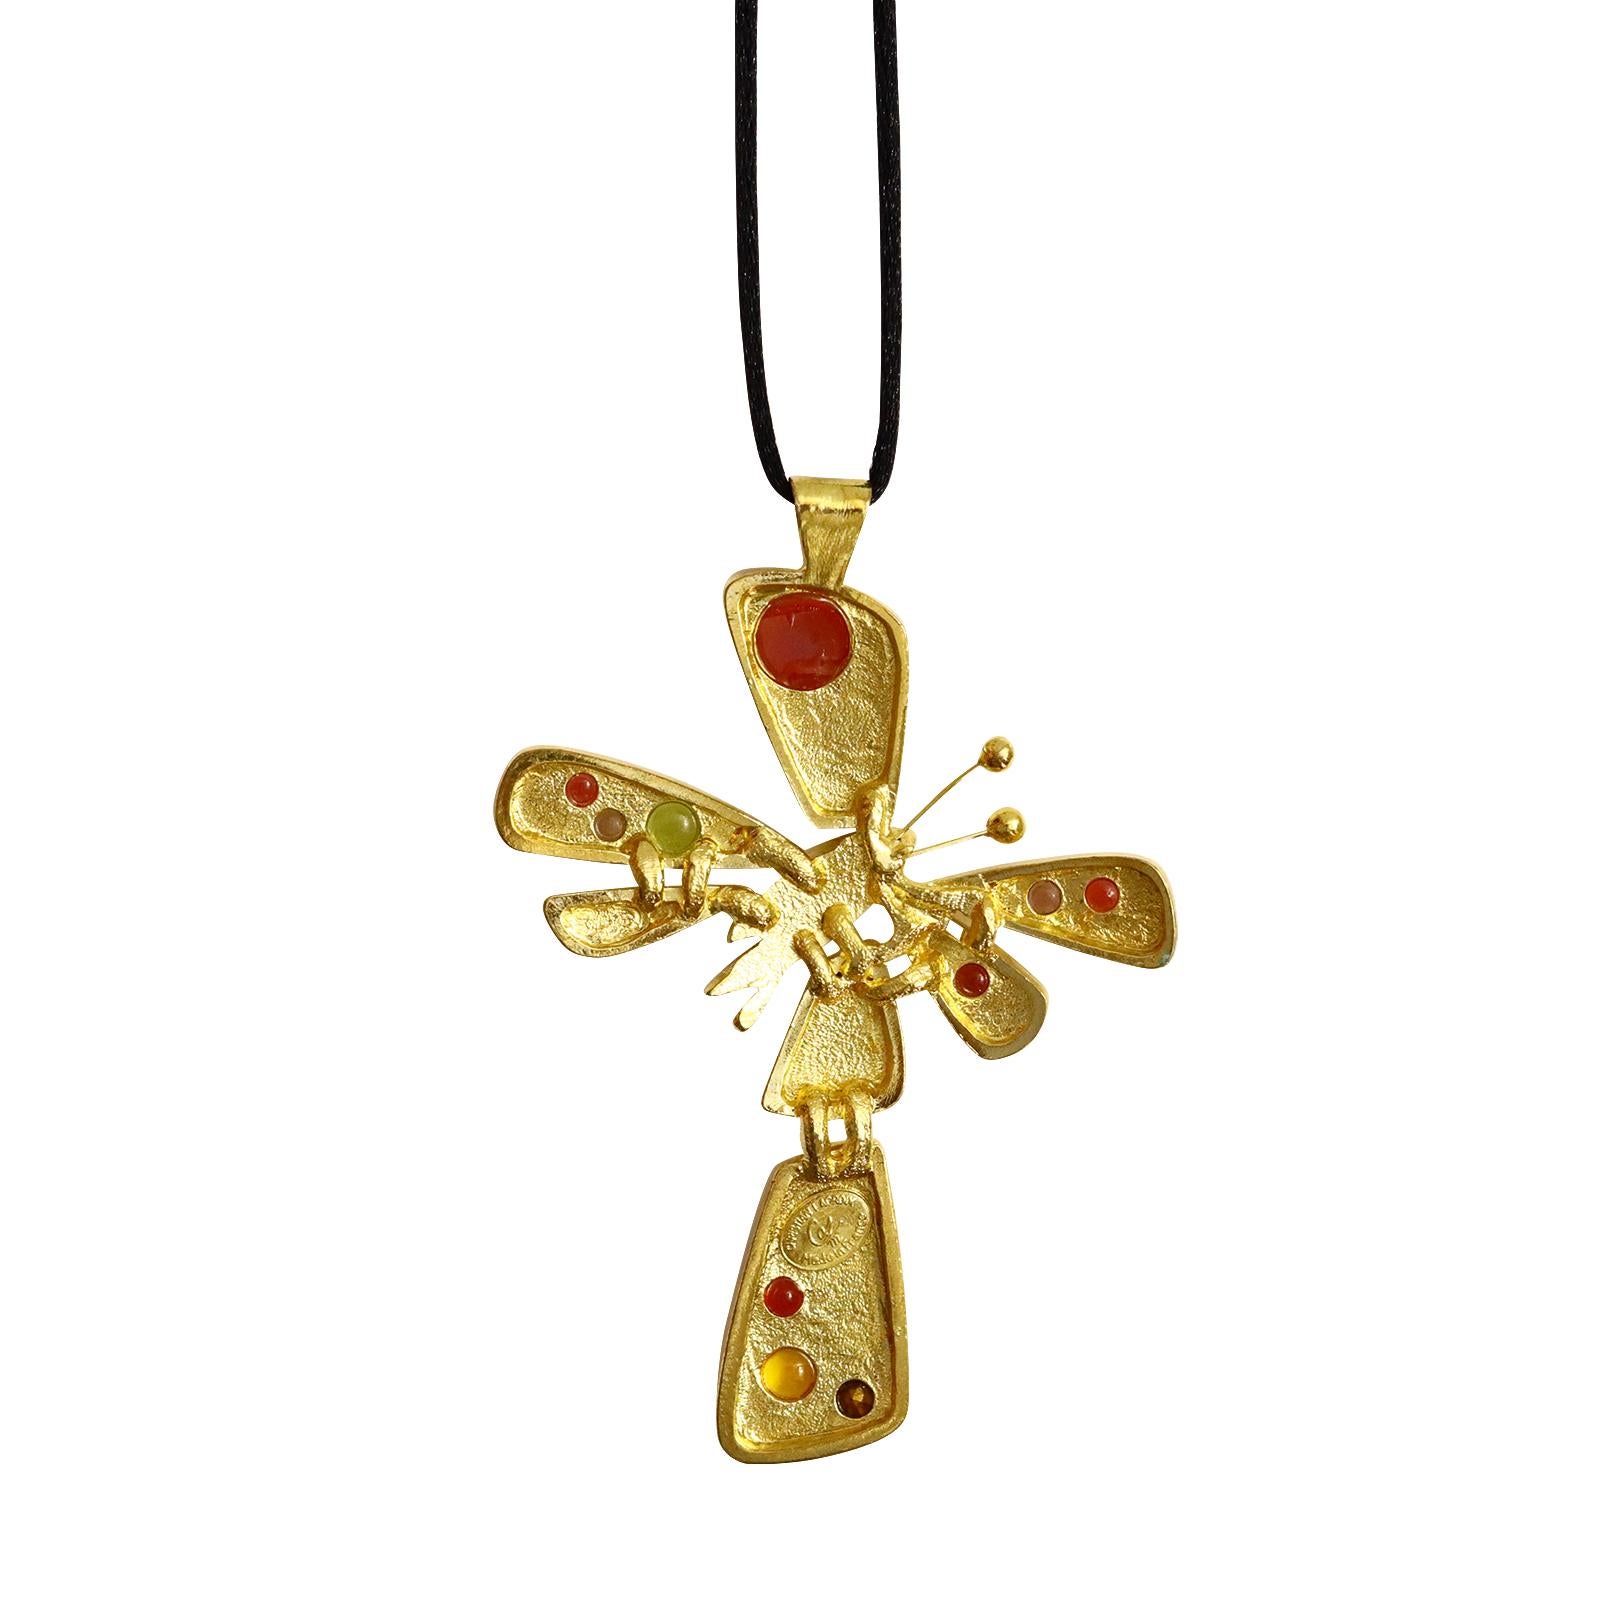 Vintage Christian Lacroix Gold Cross with Cabochon Necklace Circa 1990s For Sale 1